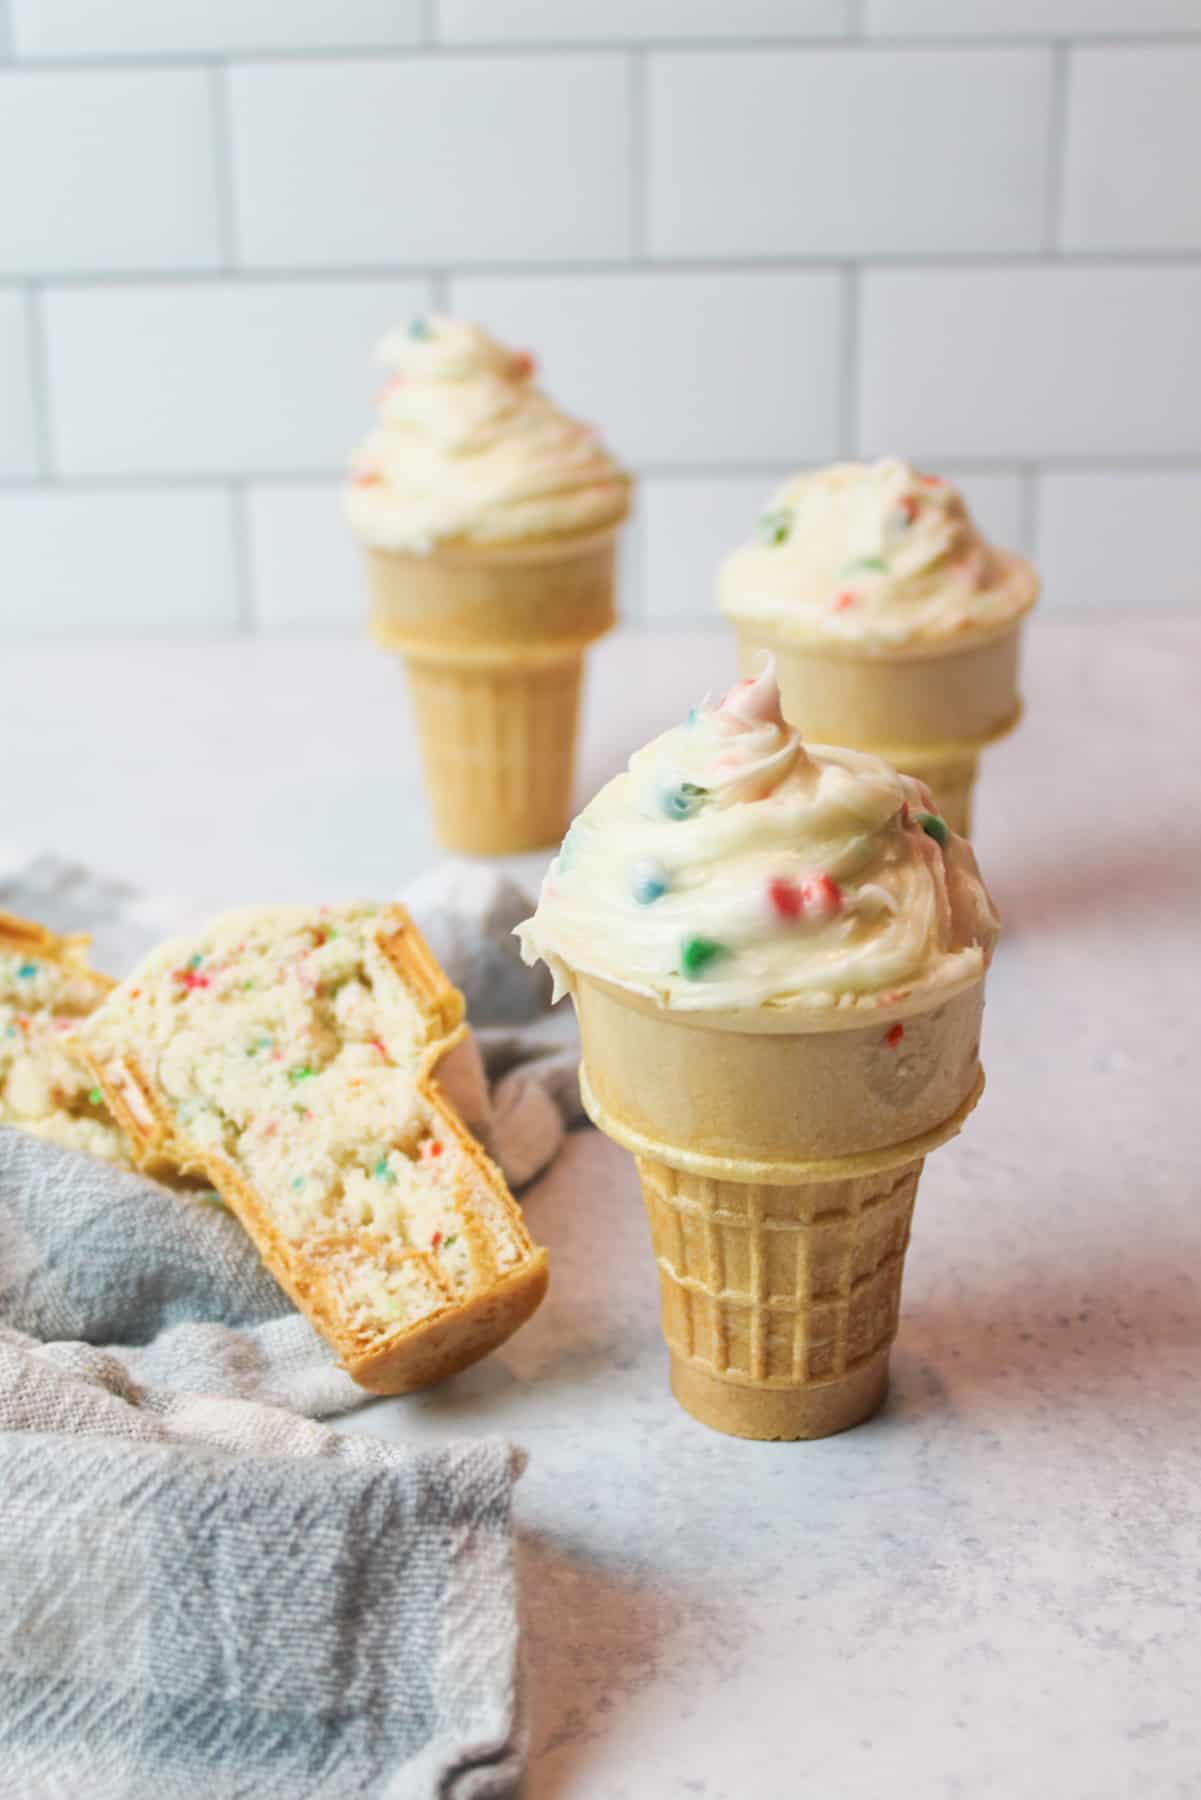 ice cream cone cupcakes with frosting and one cone split in half to reveal cake inside.